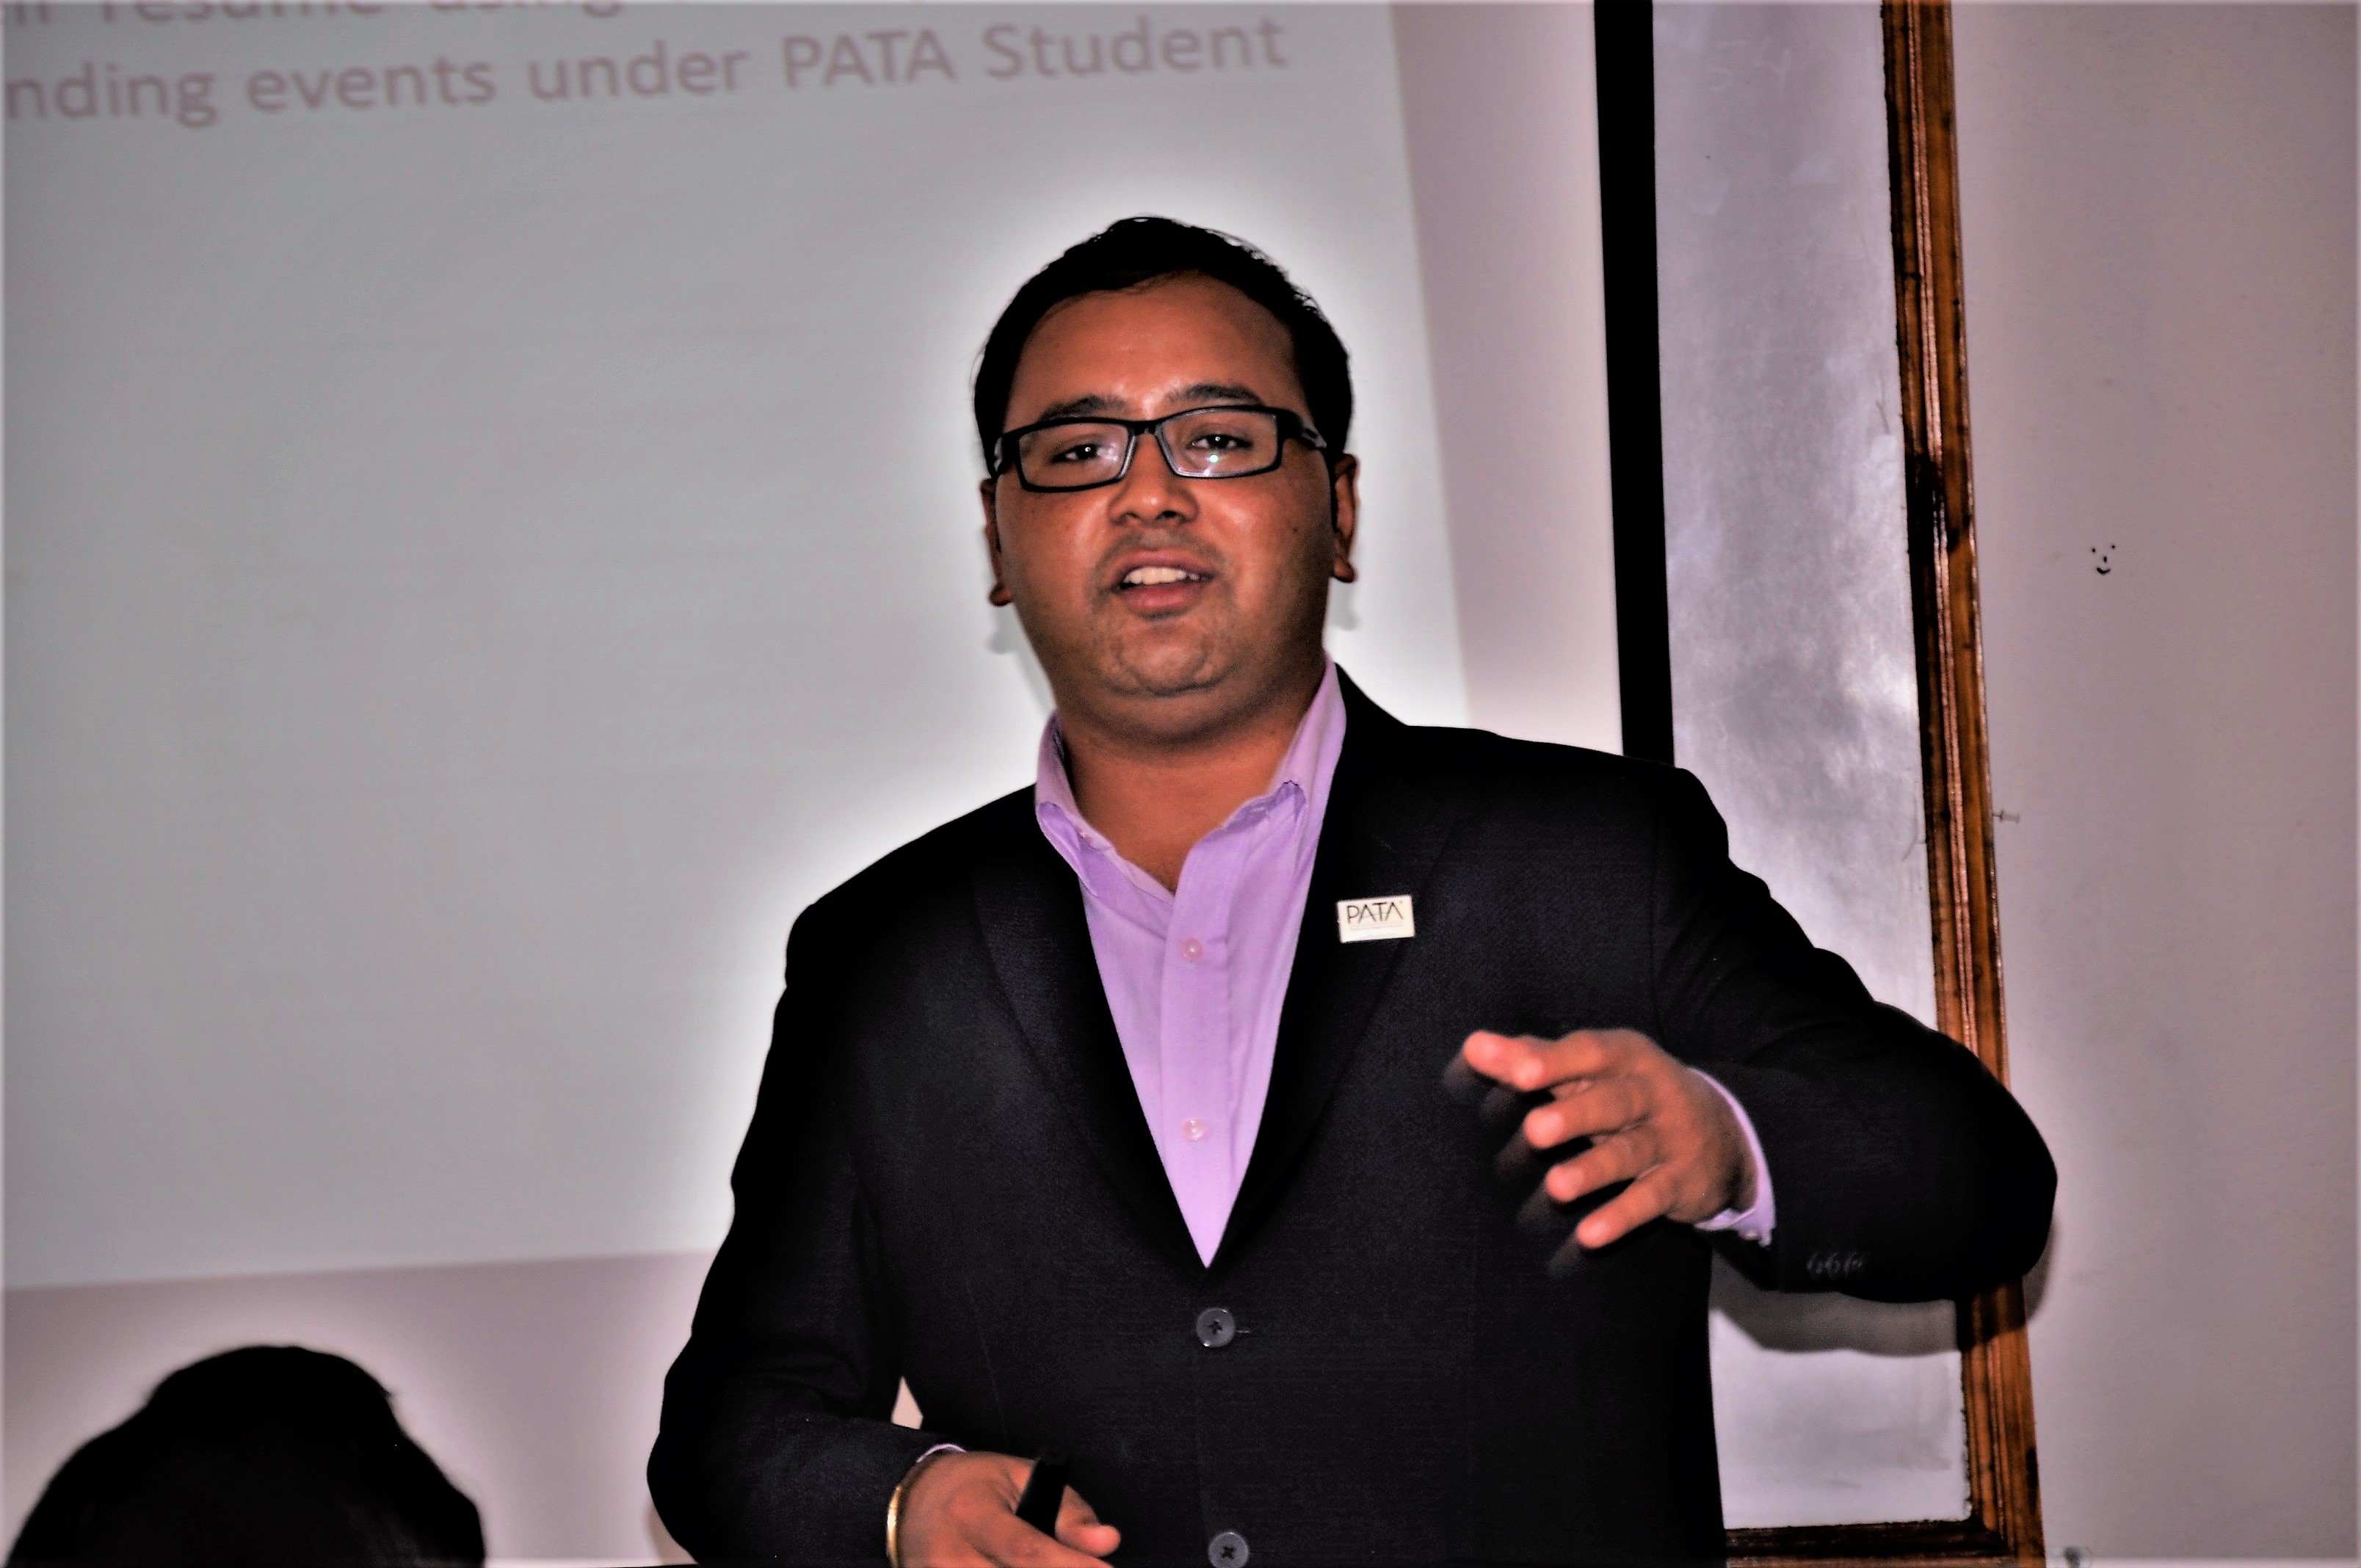 PATA Nepal CEO, Mr. Budal addresses the PNSC-NATHM’s First Introductory Meeting